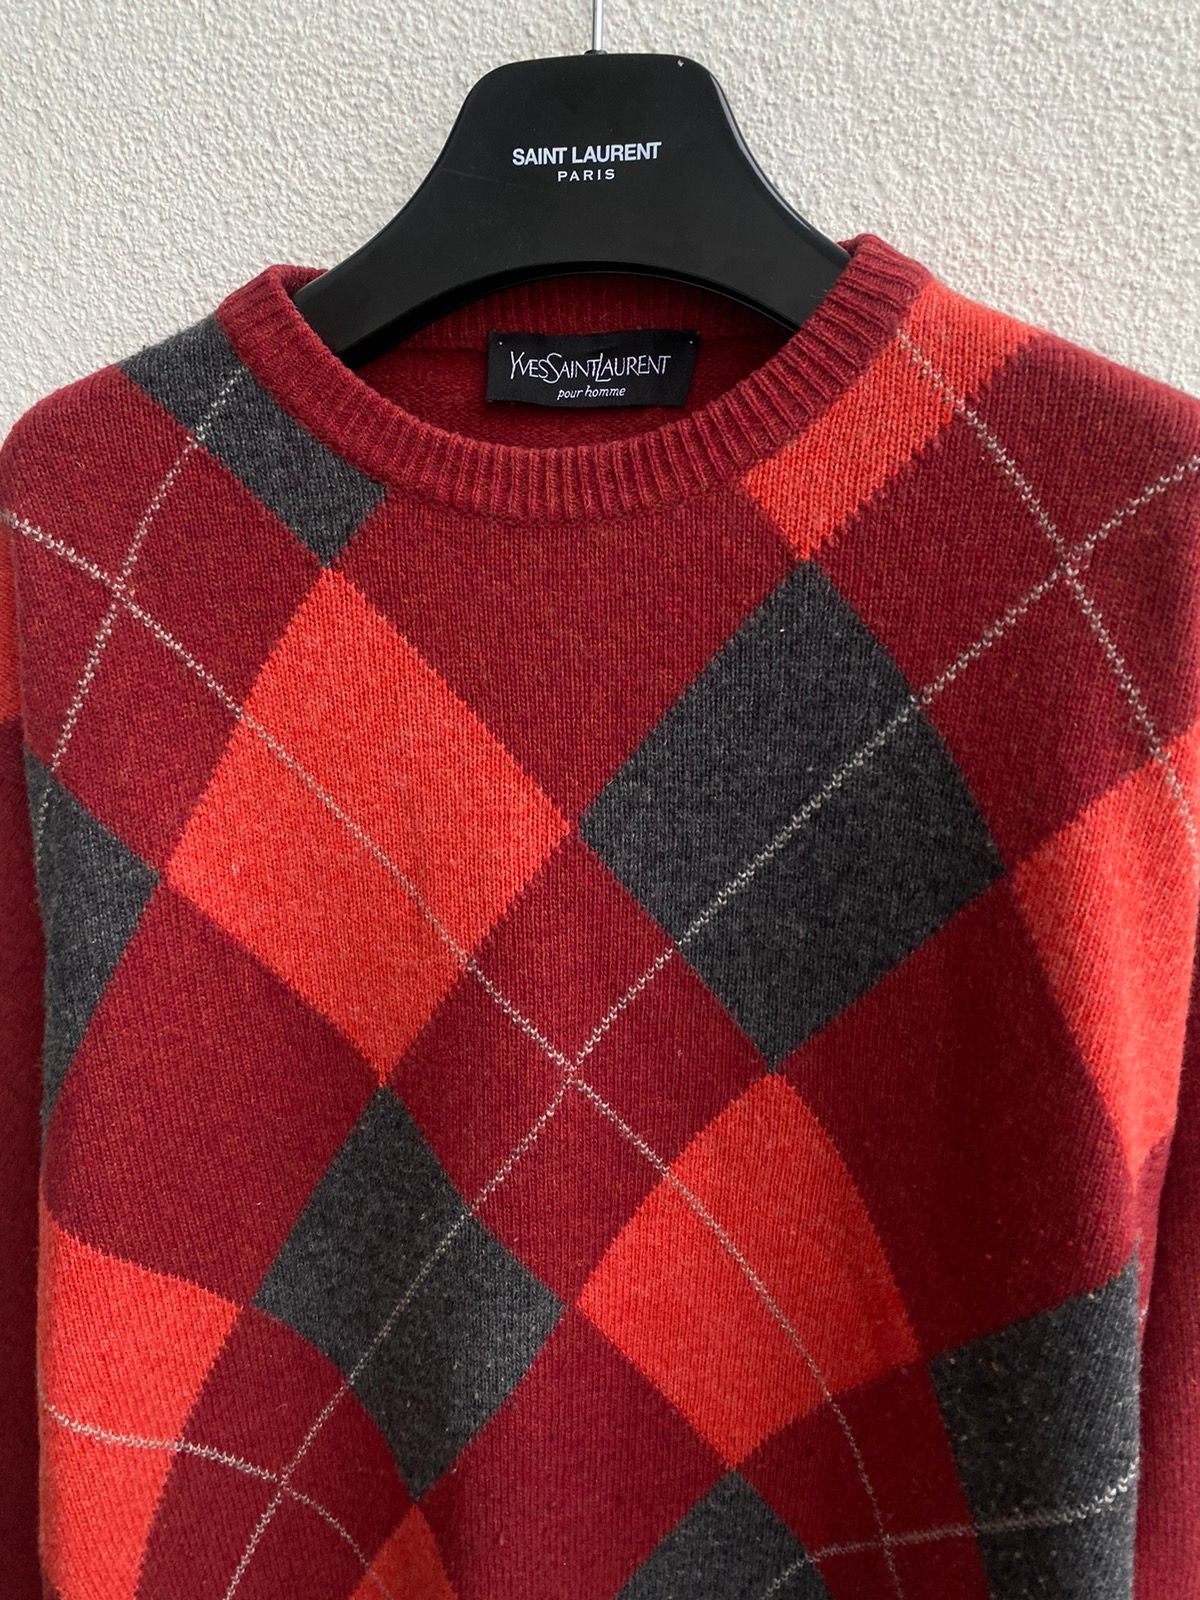 Vintage 🇮🇹italy 90’s YSL Sweater Wool Knit Soft Size US L / EU 52-54 / 3 - 6 Thumbnail